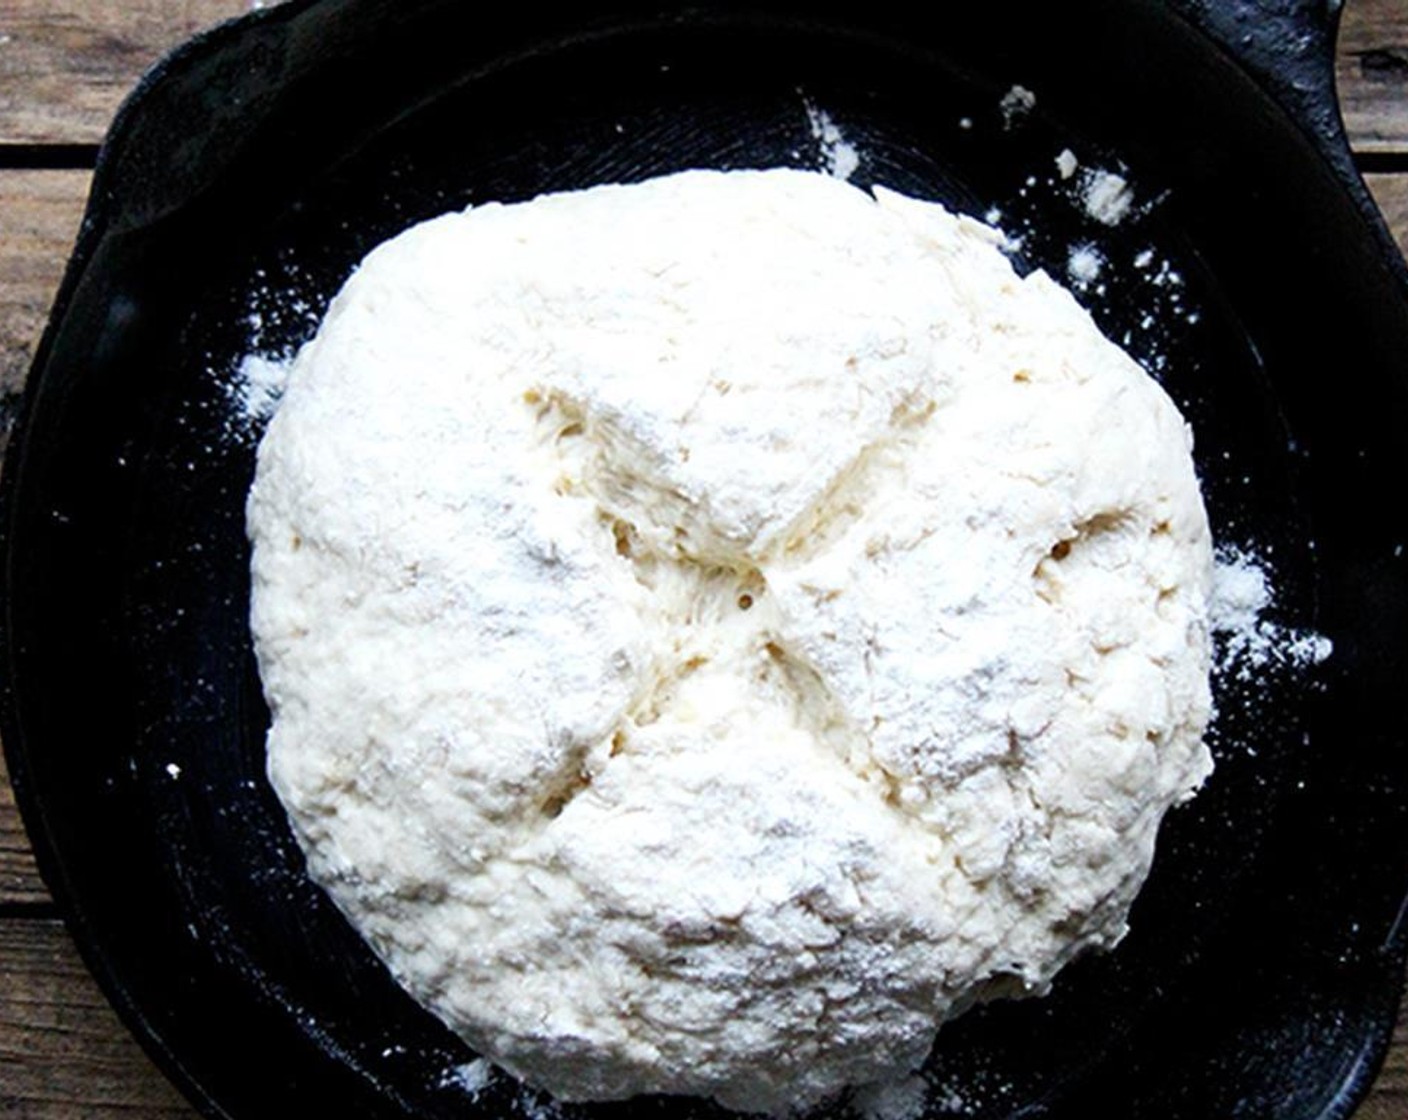 step 5 Lightly flour your hands and sprinkle a little flour over the sticky dough ball. use your hands to scrape the dough from the sides of the bowl and to quickly shape the mass into a ball, kneading lightly if necessary. Transfer to prepared skillet.